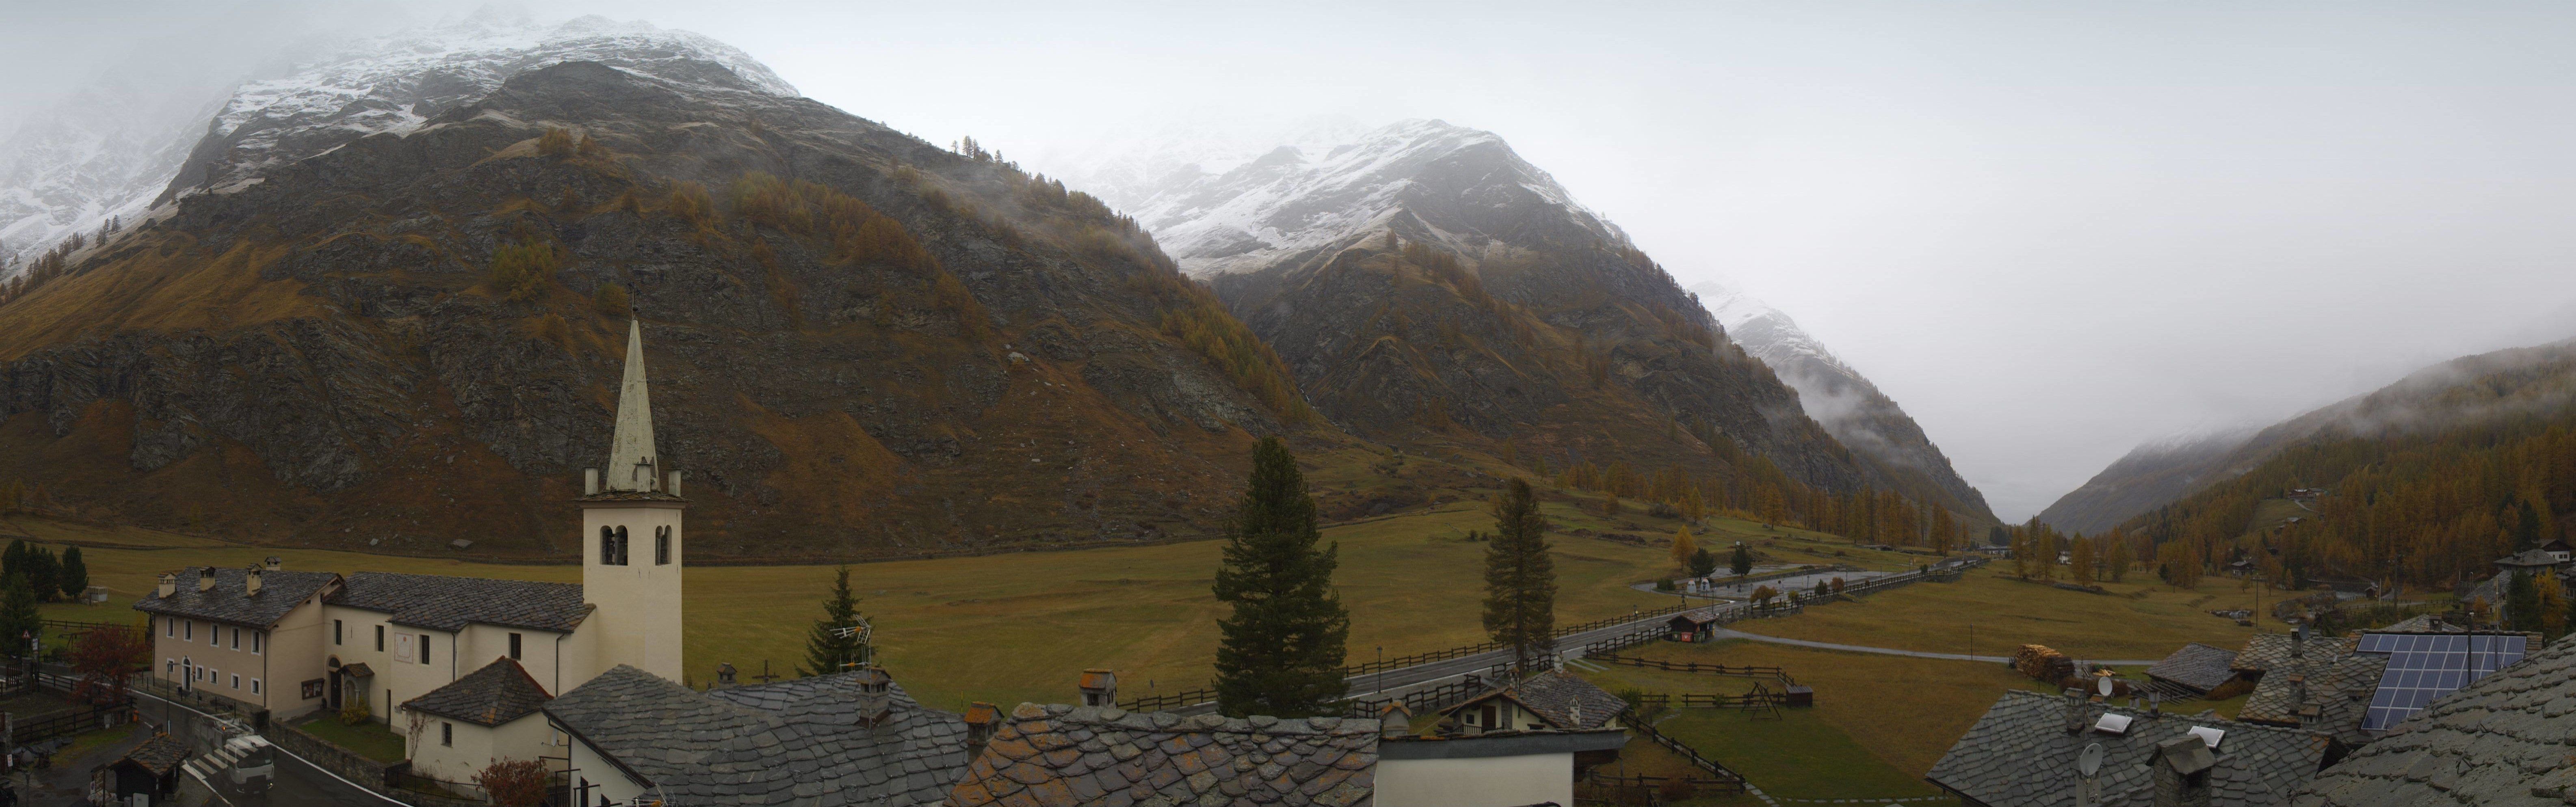 On the south side, the snow line is visibly higher, as here in Rhêmes-Notre-Dame (Aosta)